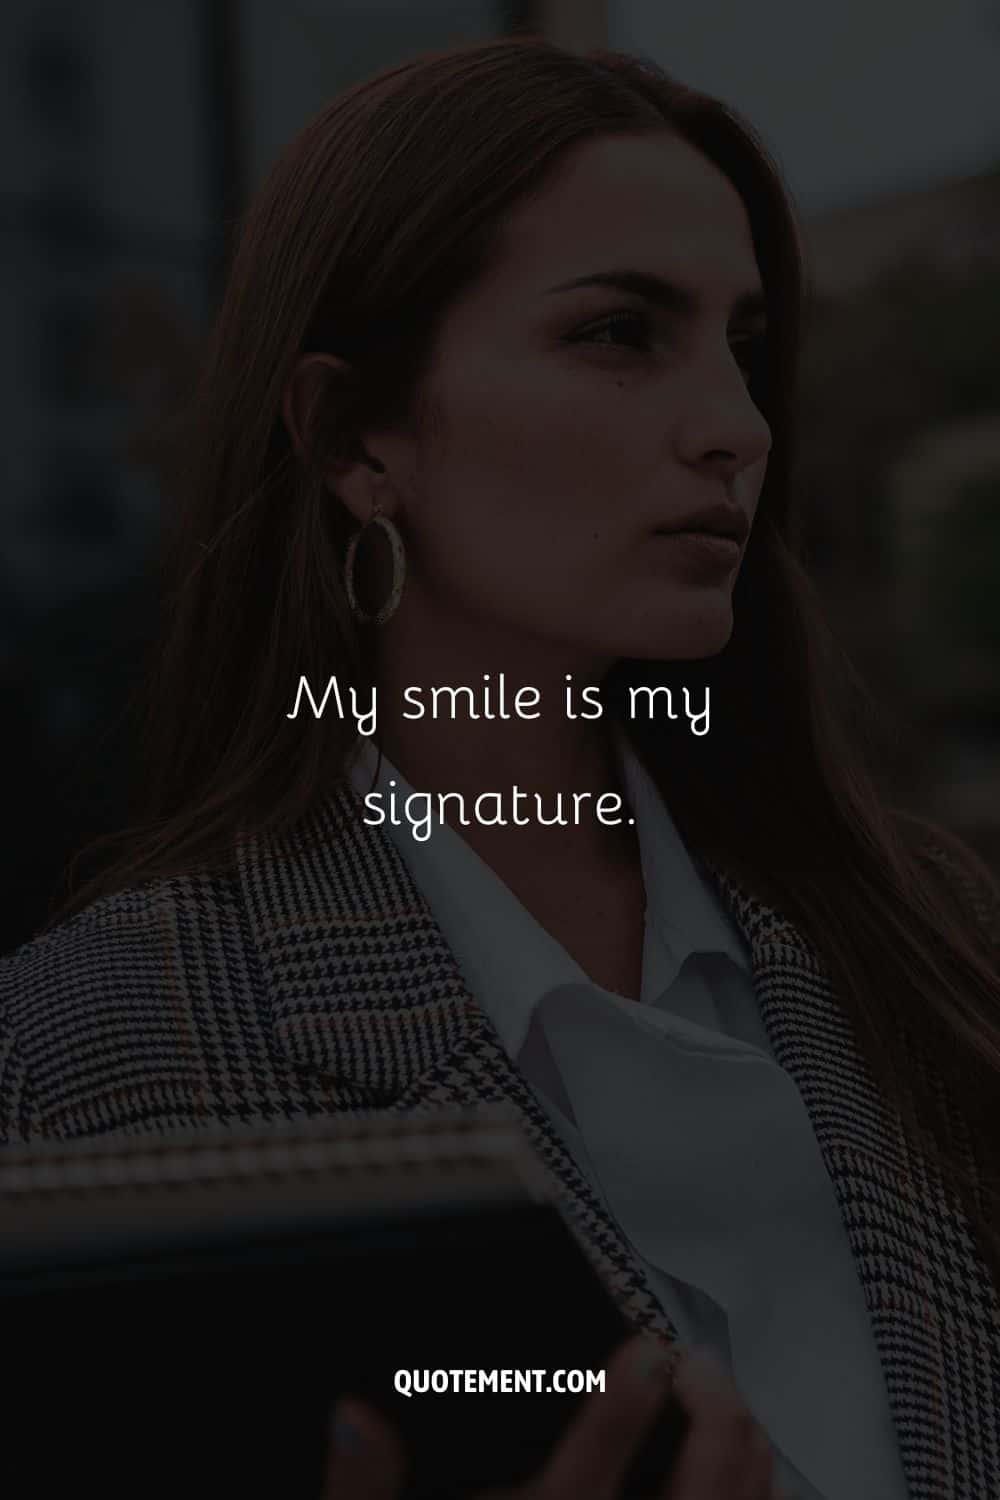 My smile is my signature.